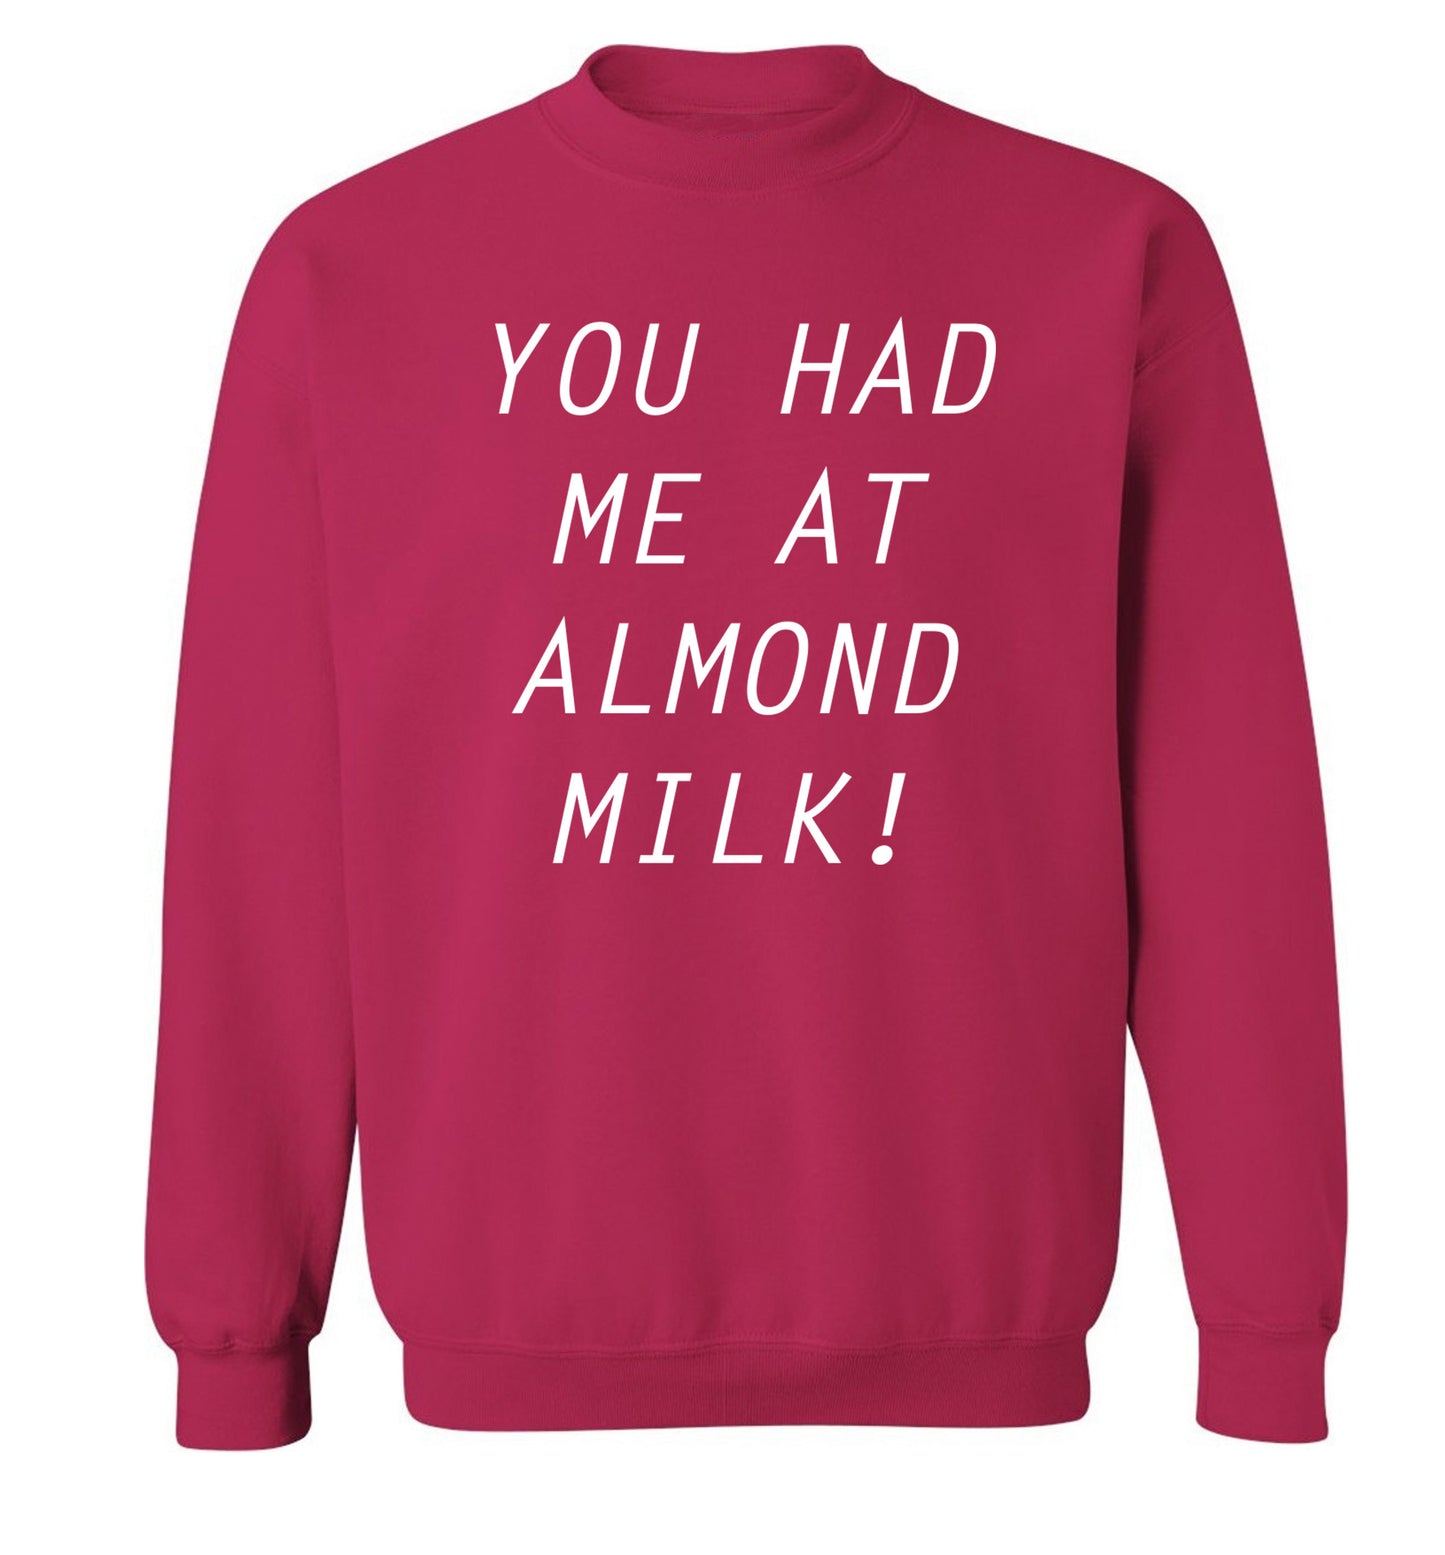 You had me at almond milk Adult's unisex pink Sweater 2XL